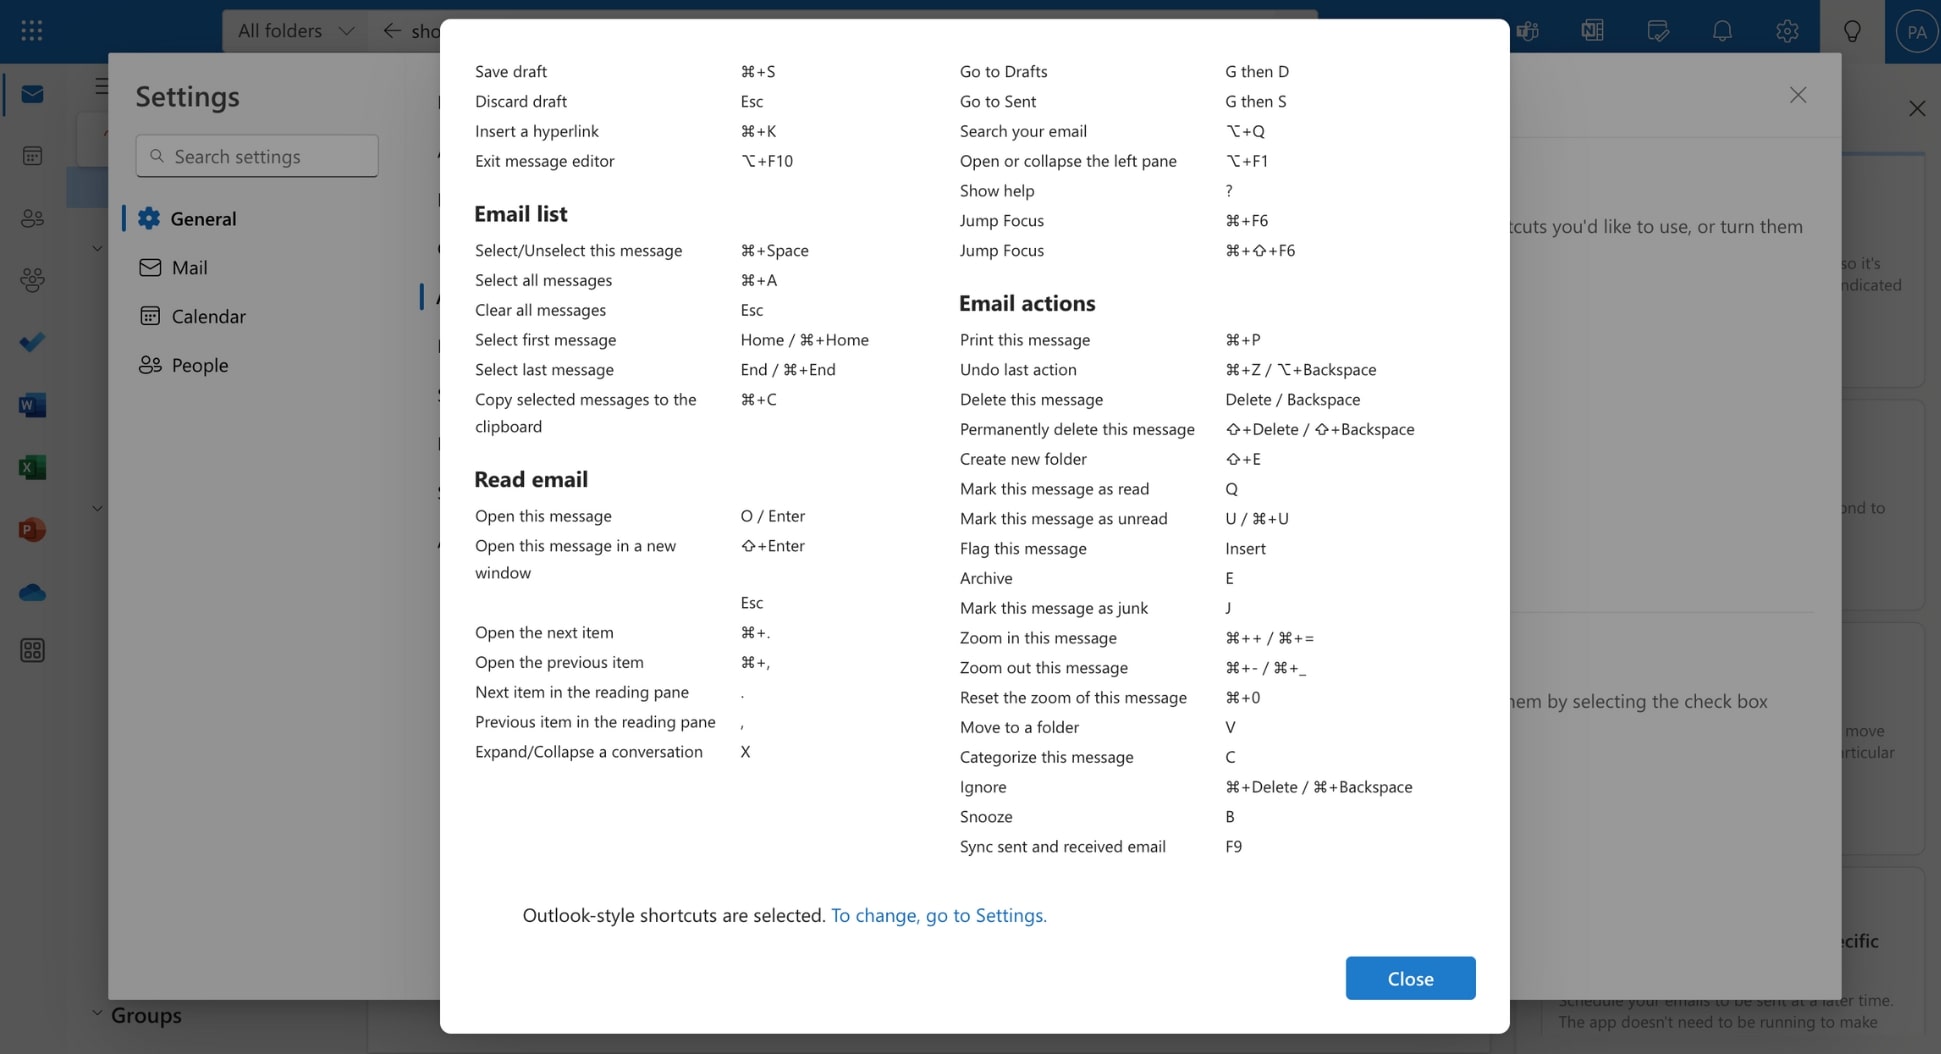 How to find the full list of supported keyboard shortcuts in Outlook